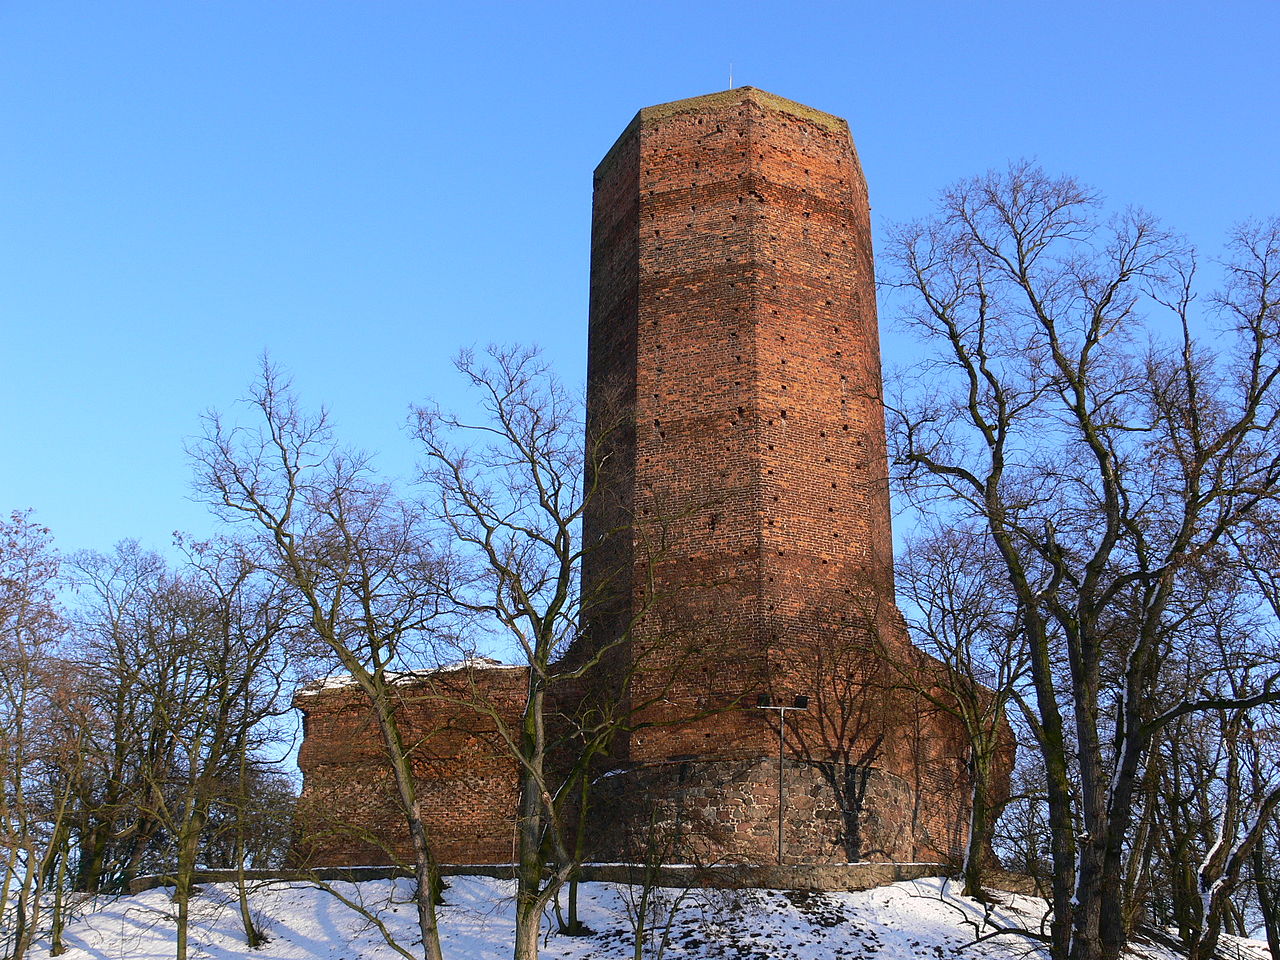 Mouse Tower in Kruszwica, near Gniezno.